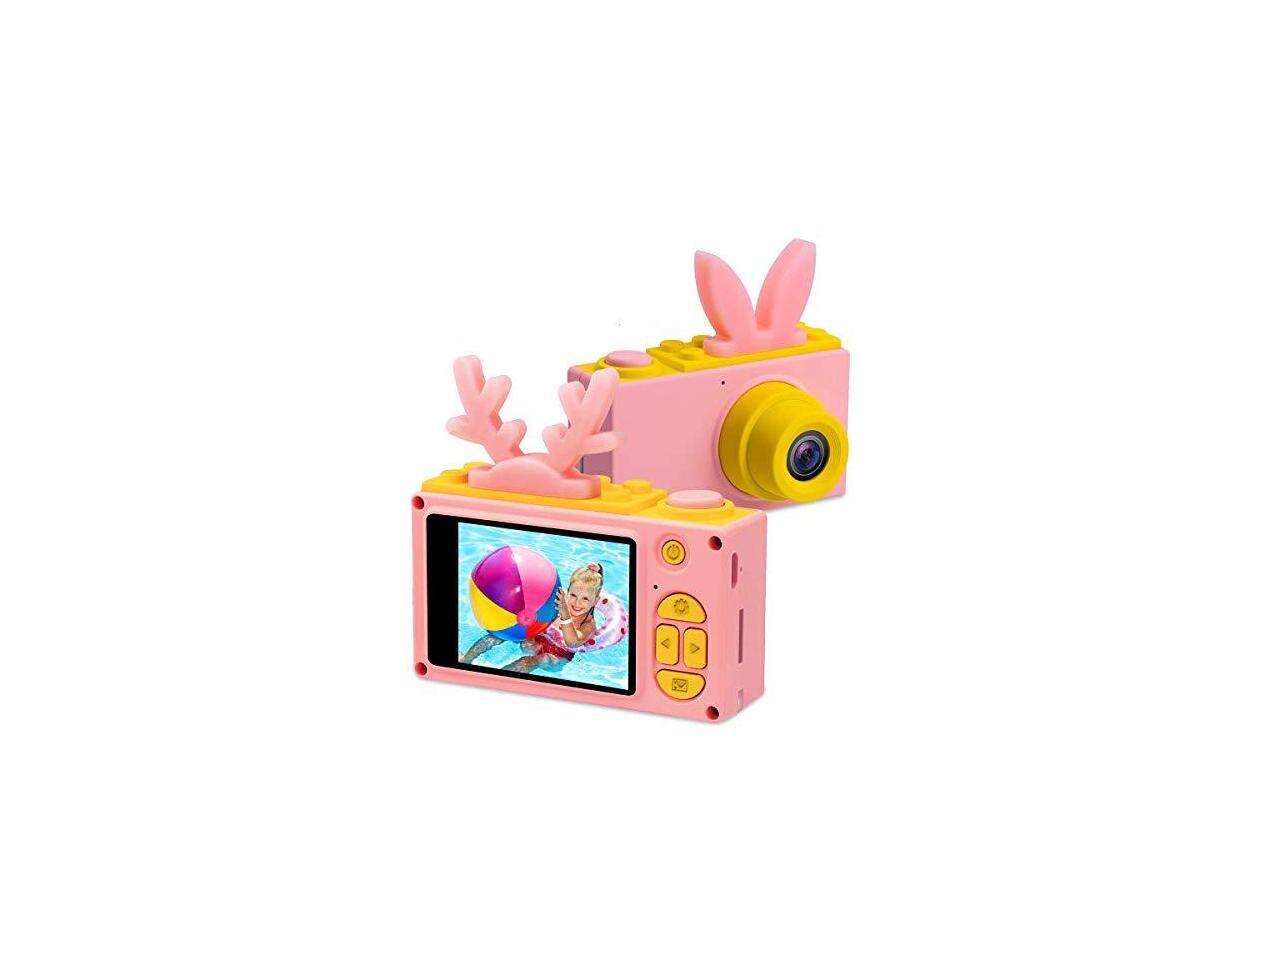 Camera Gifts for Boys Girls 8MP HD Digital Cameras Buildin Rechargeable Battery Child Toys Gift for 6+ with 16GB Memory Card Pink